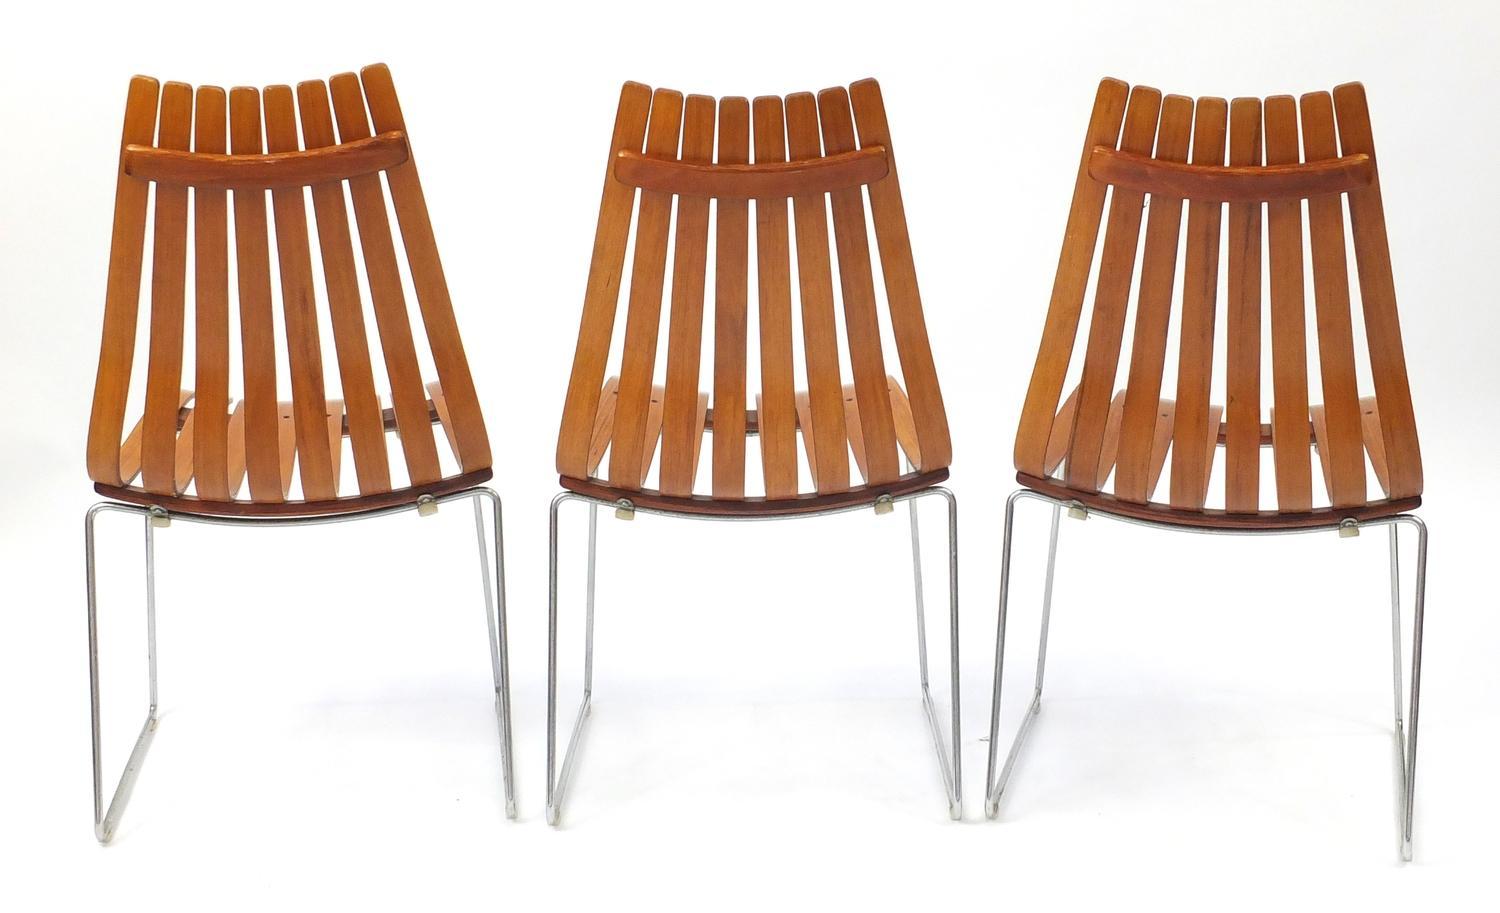 Mid-20th Century Hans Brattrud Rosewood Dining Table & Six Scandia Chairs, Hove Mobler circa 1965